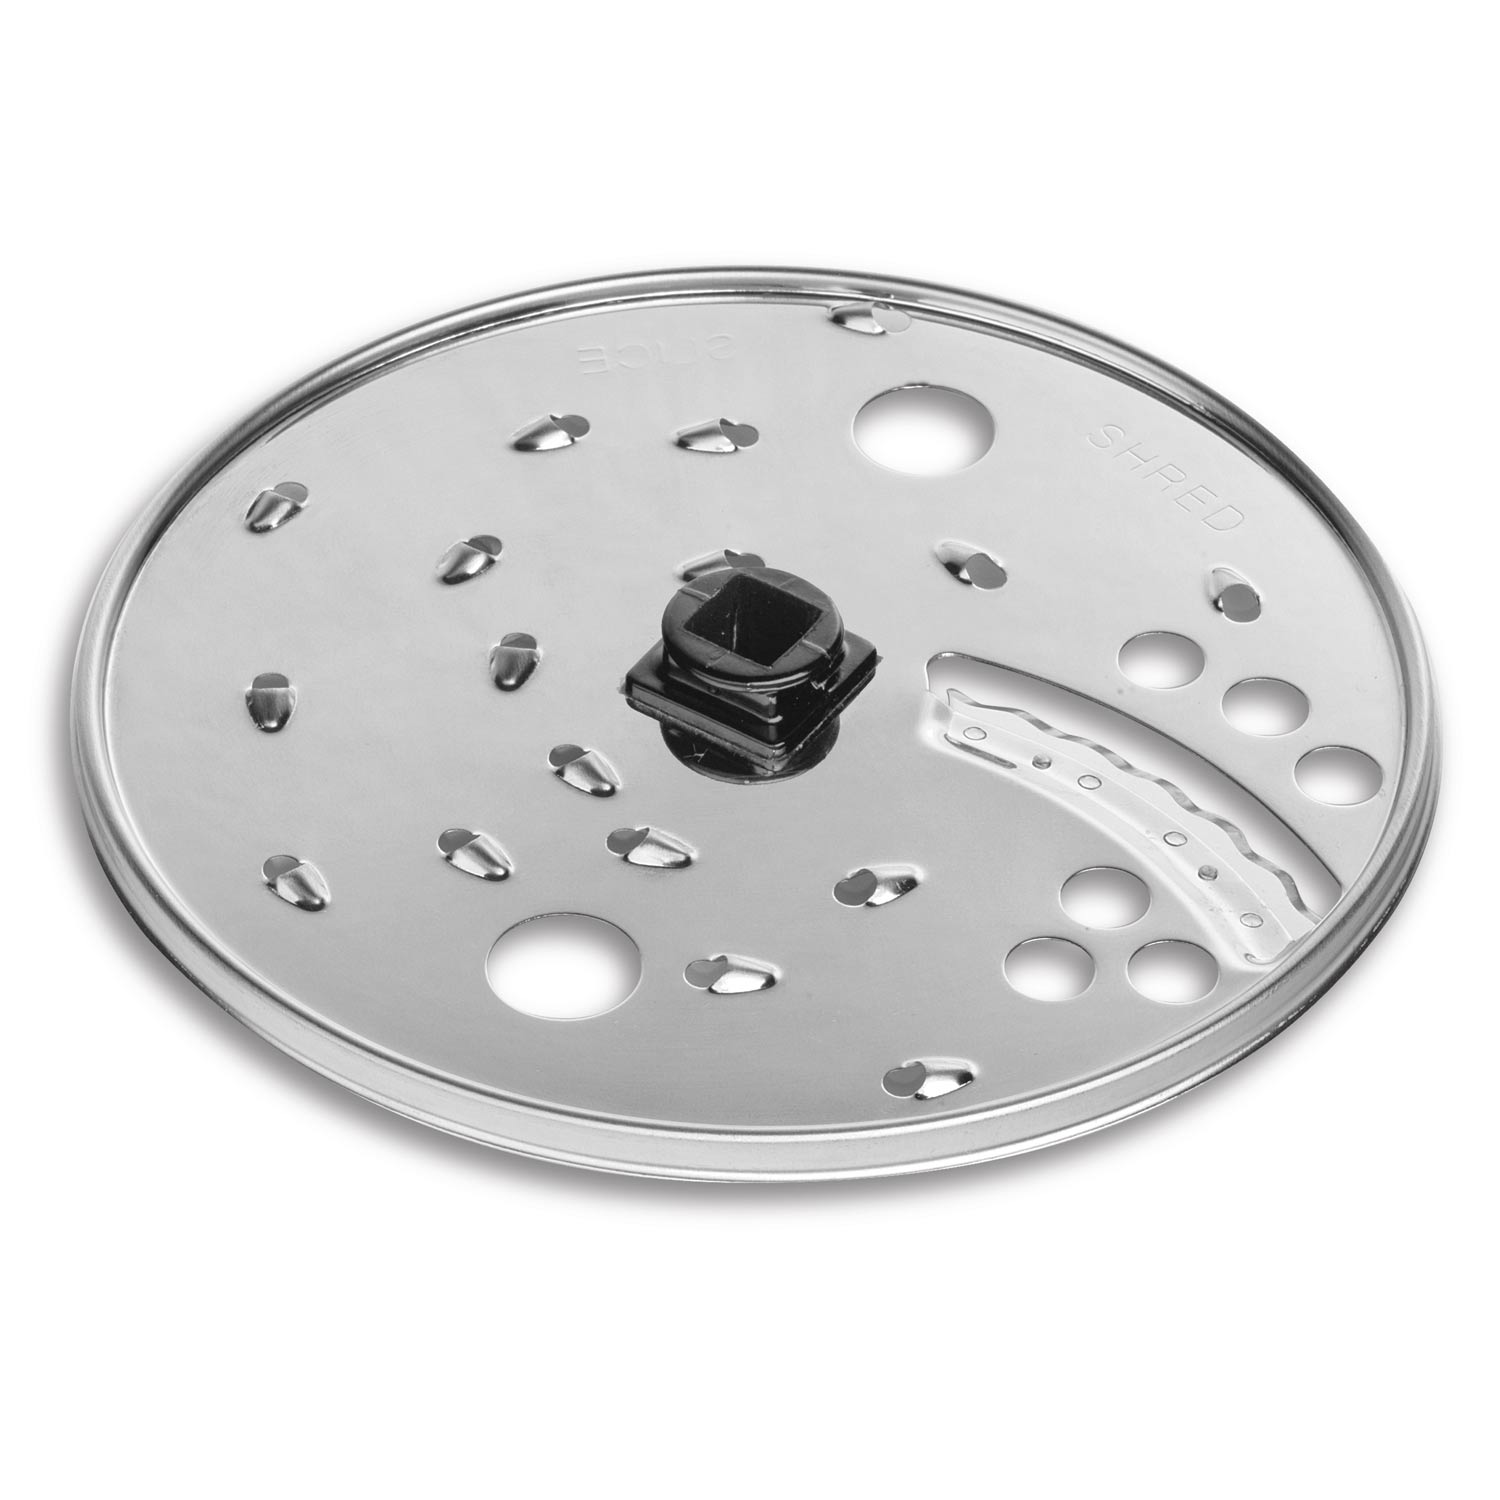 Shred Disc Blade fits 70740 Hamilton Beach Replacement Food Processor Slice 